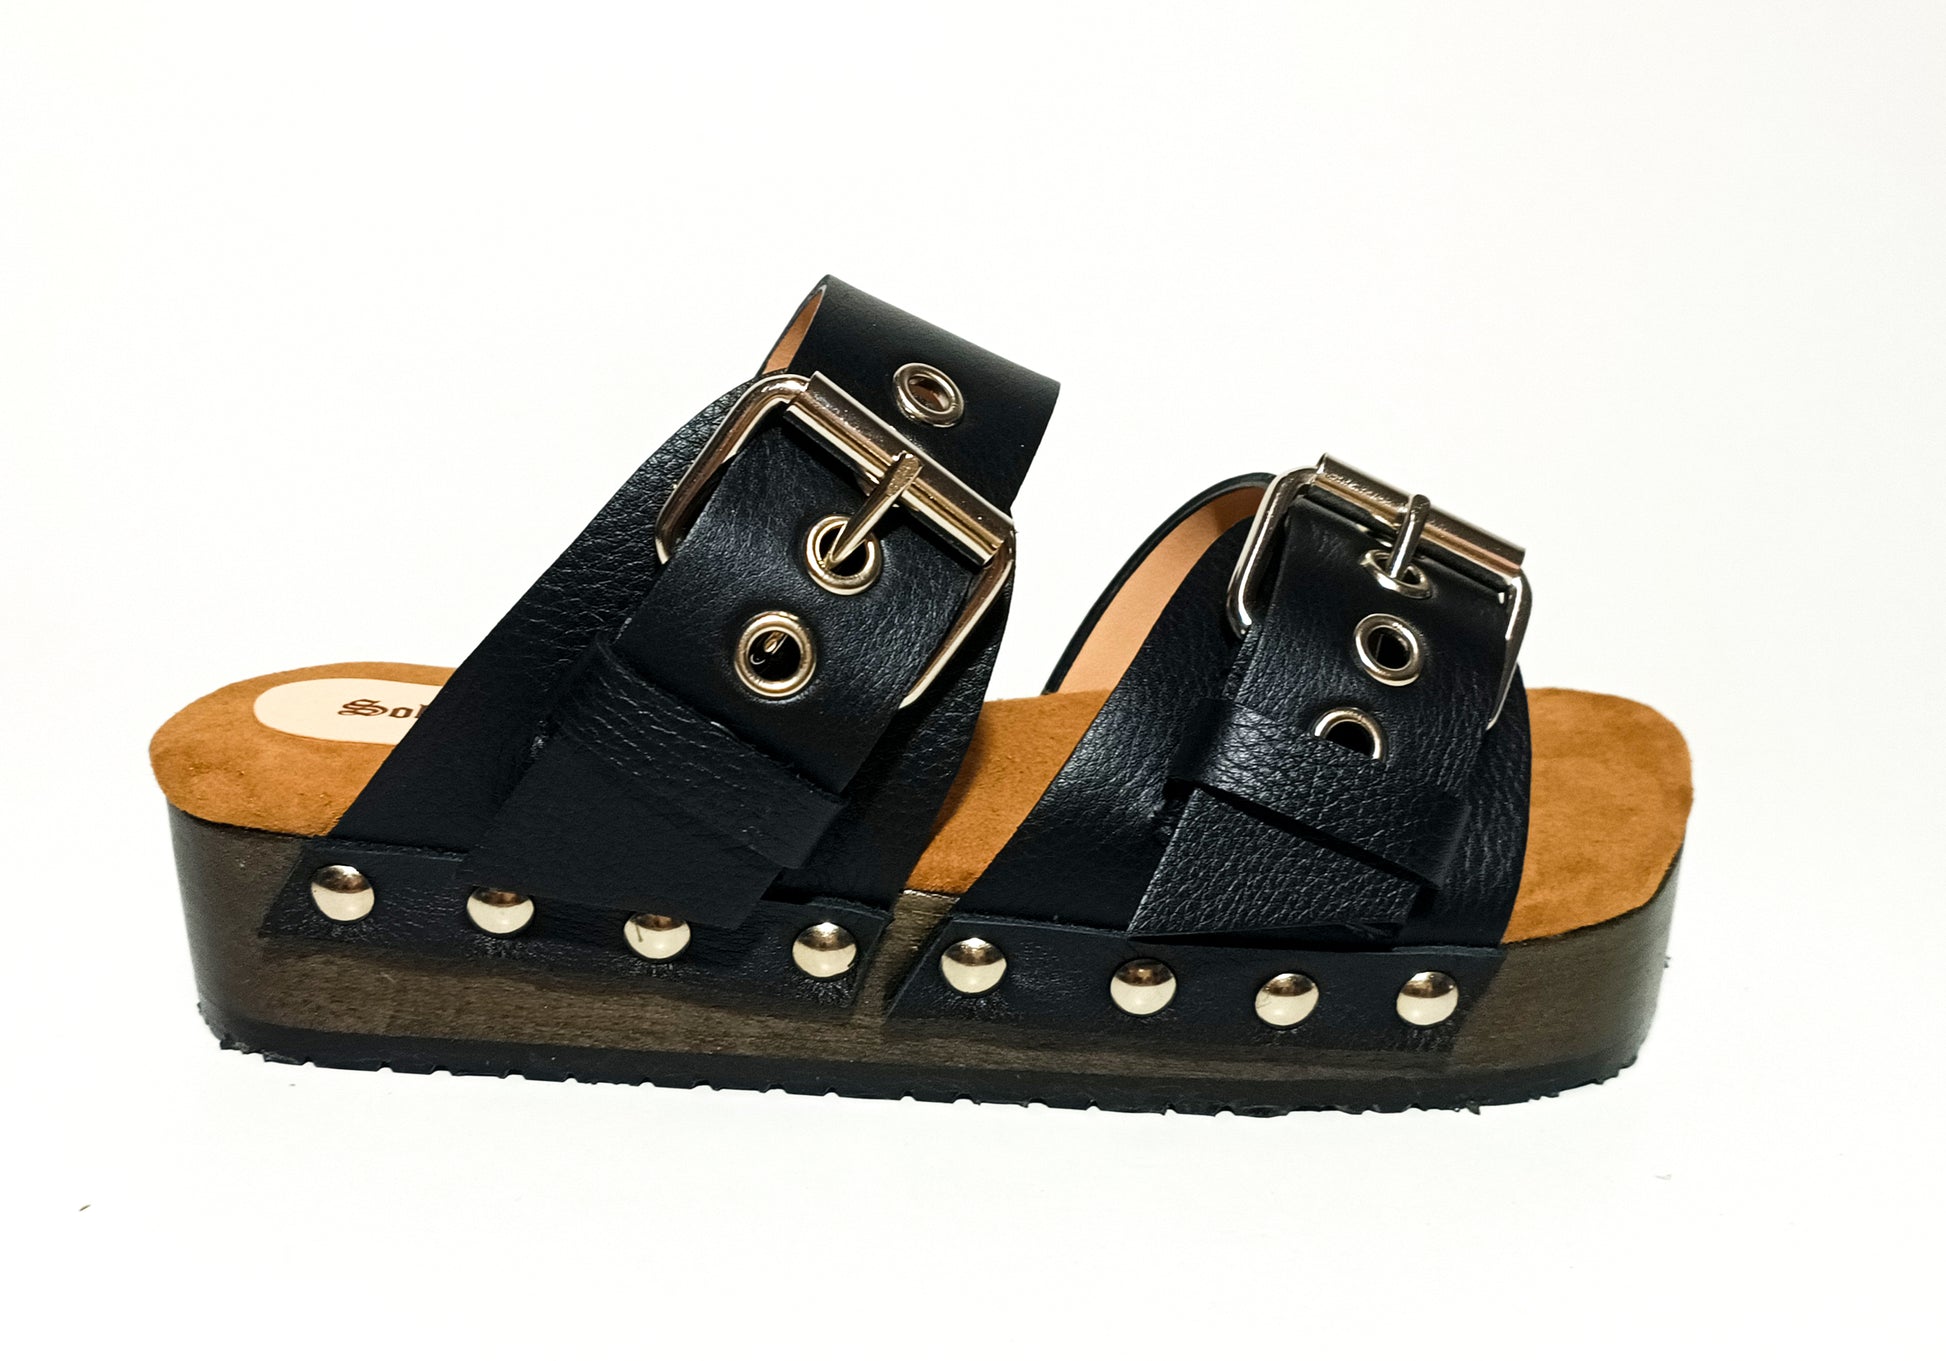 Leather clog sandal with buckles. Clog sandals with buckles and wooden wedge. Women's leather sandals birkenstock style. Sizes 34 to 47. High quality handmade leather shoes by sol Caleyo. Sustainable fashion.